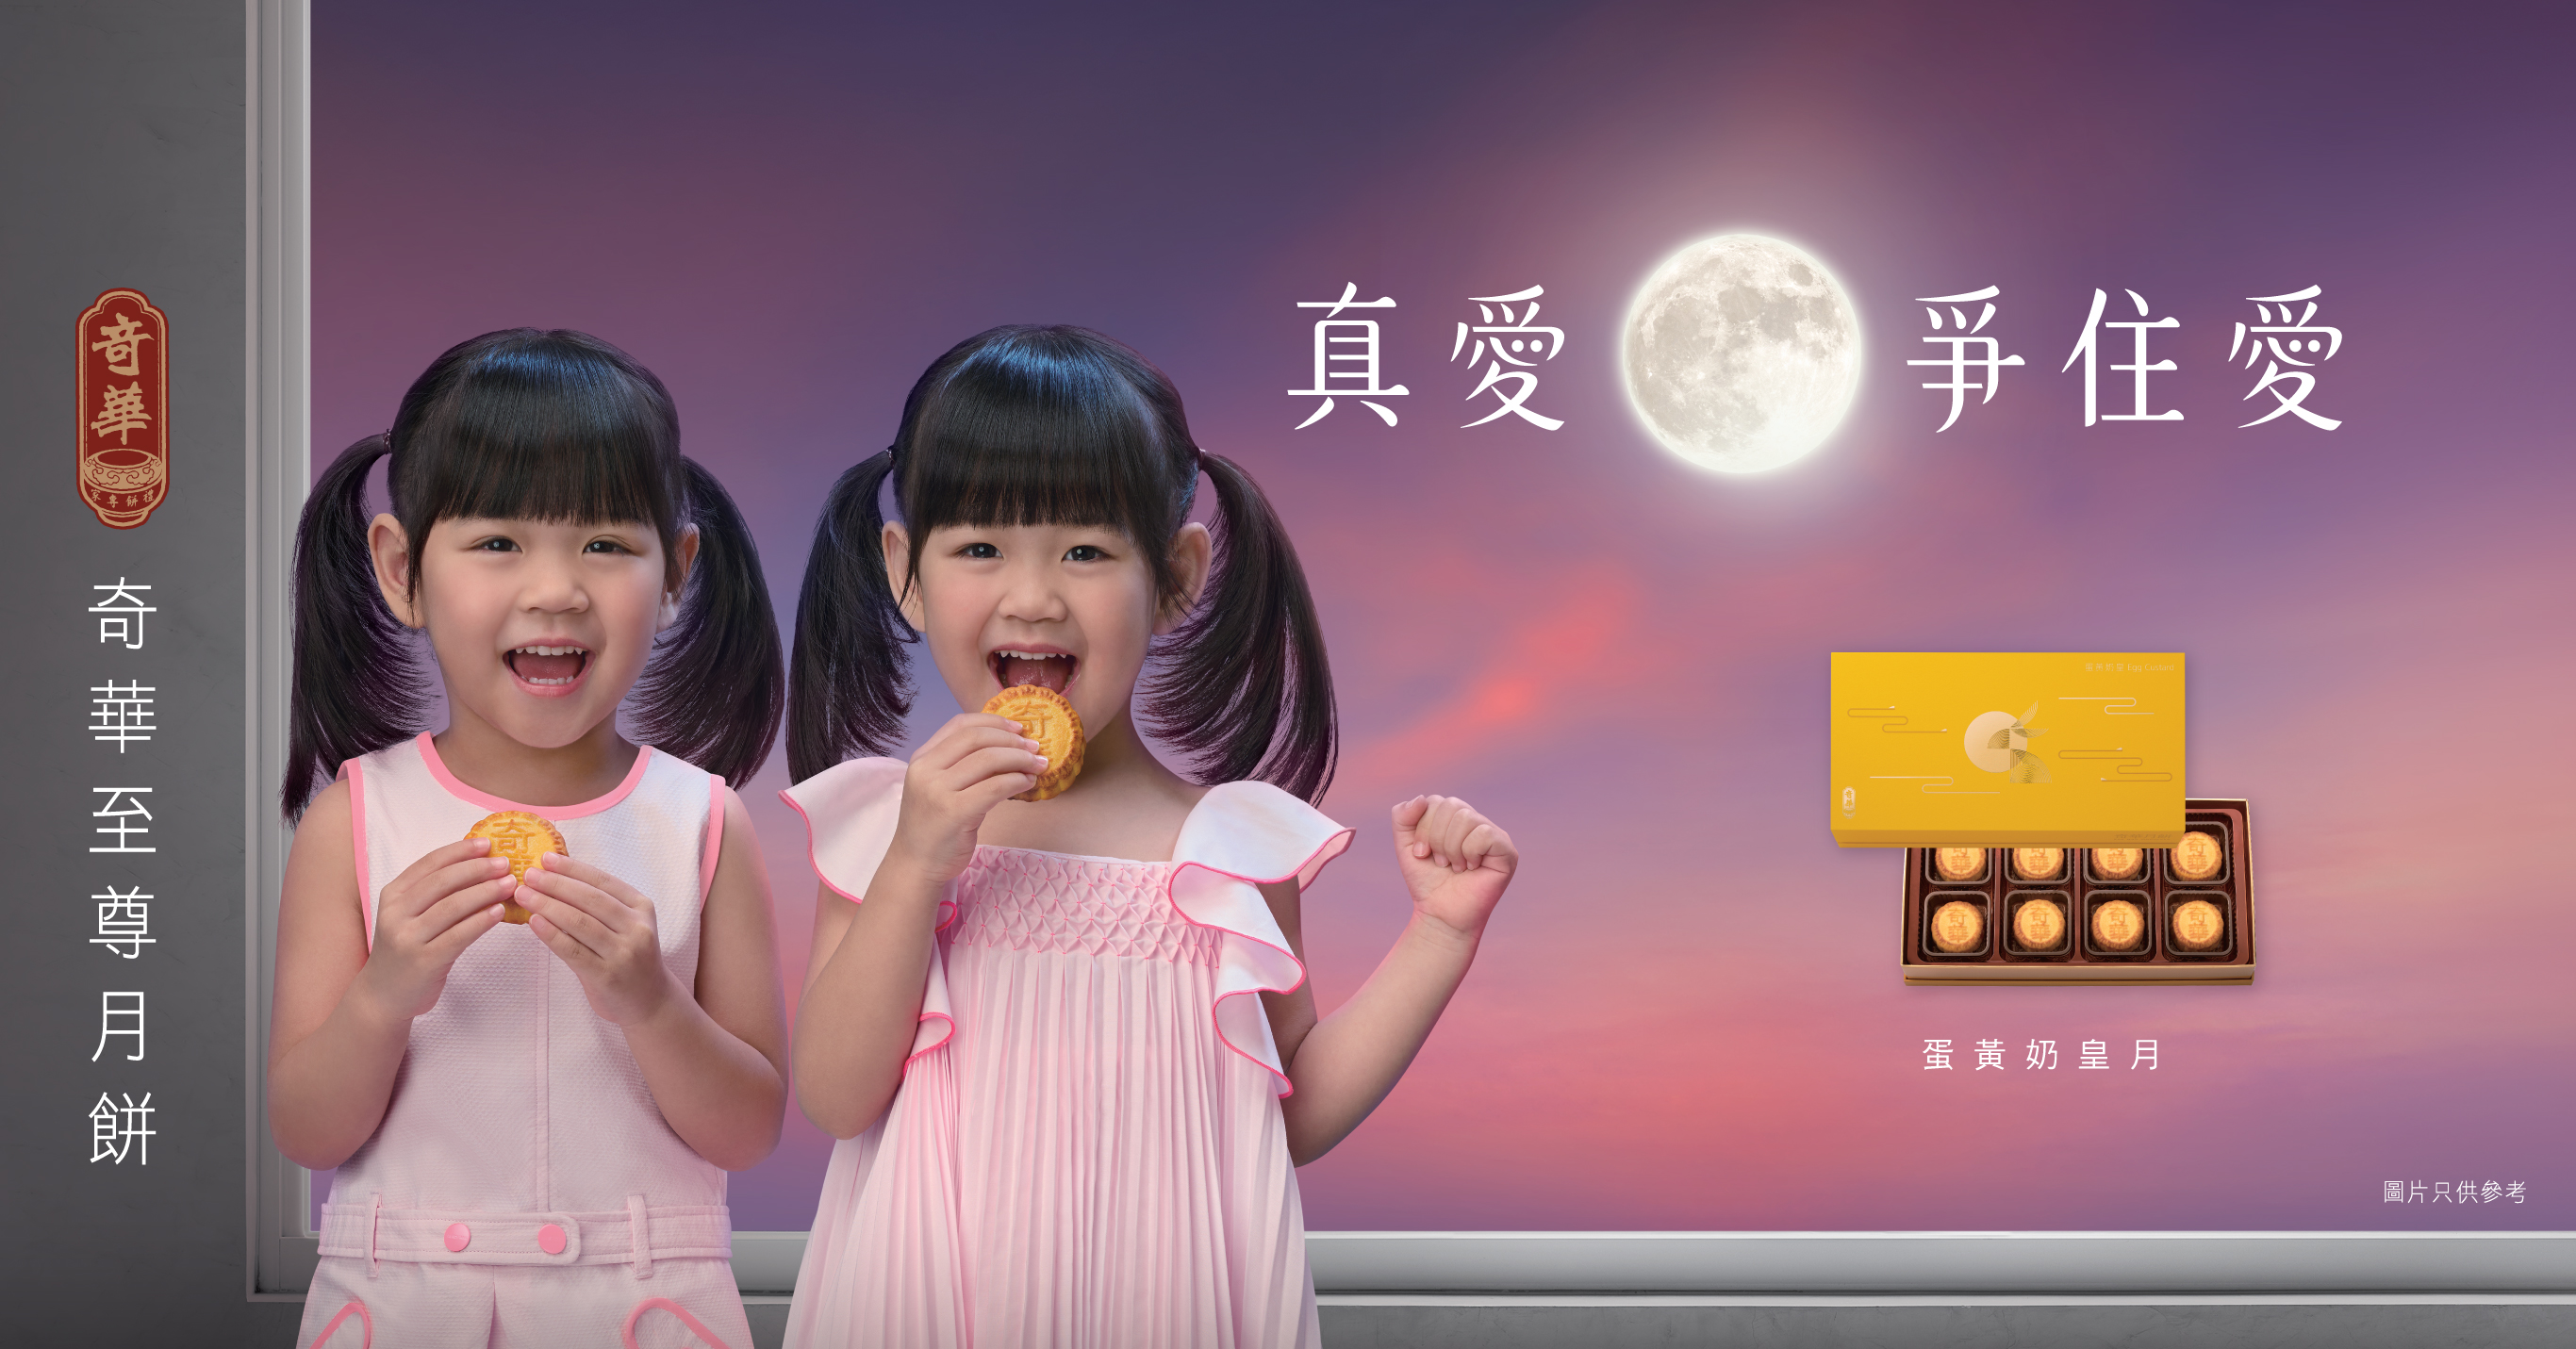 The new Kee Wah TV advertisement has now been launched.